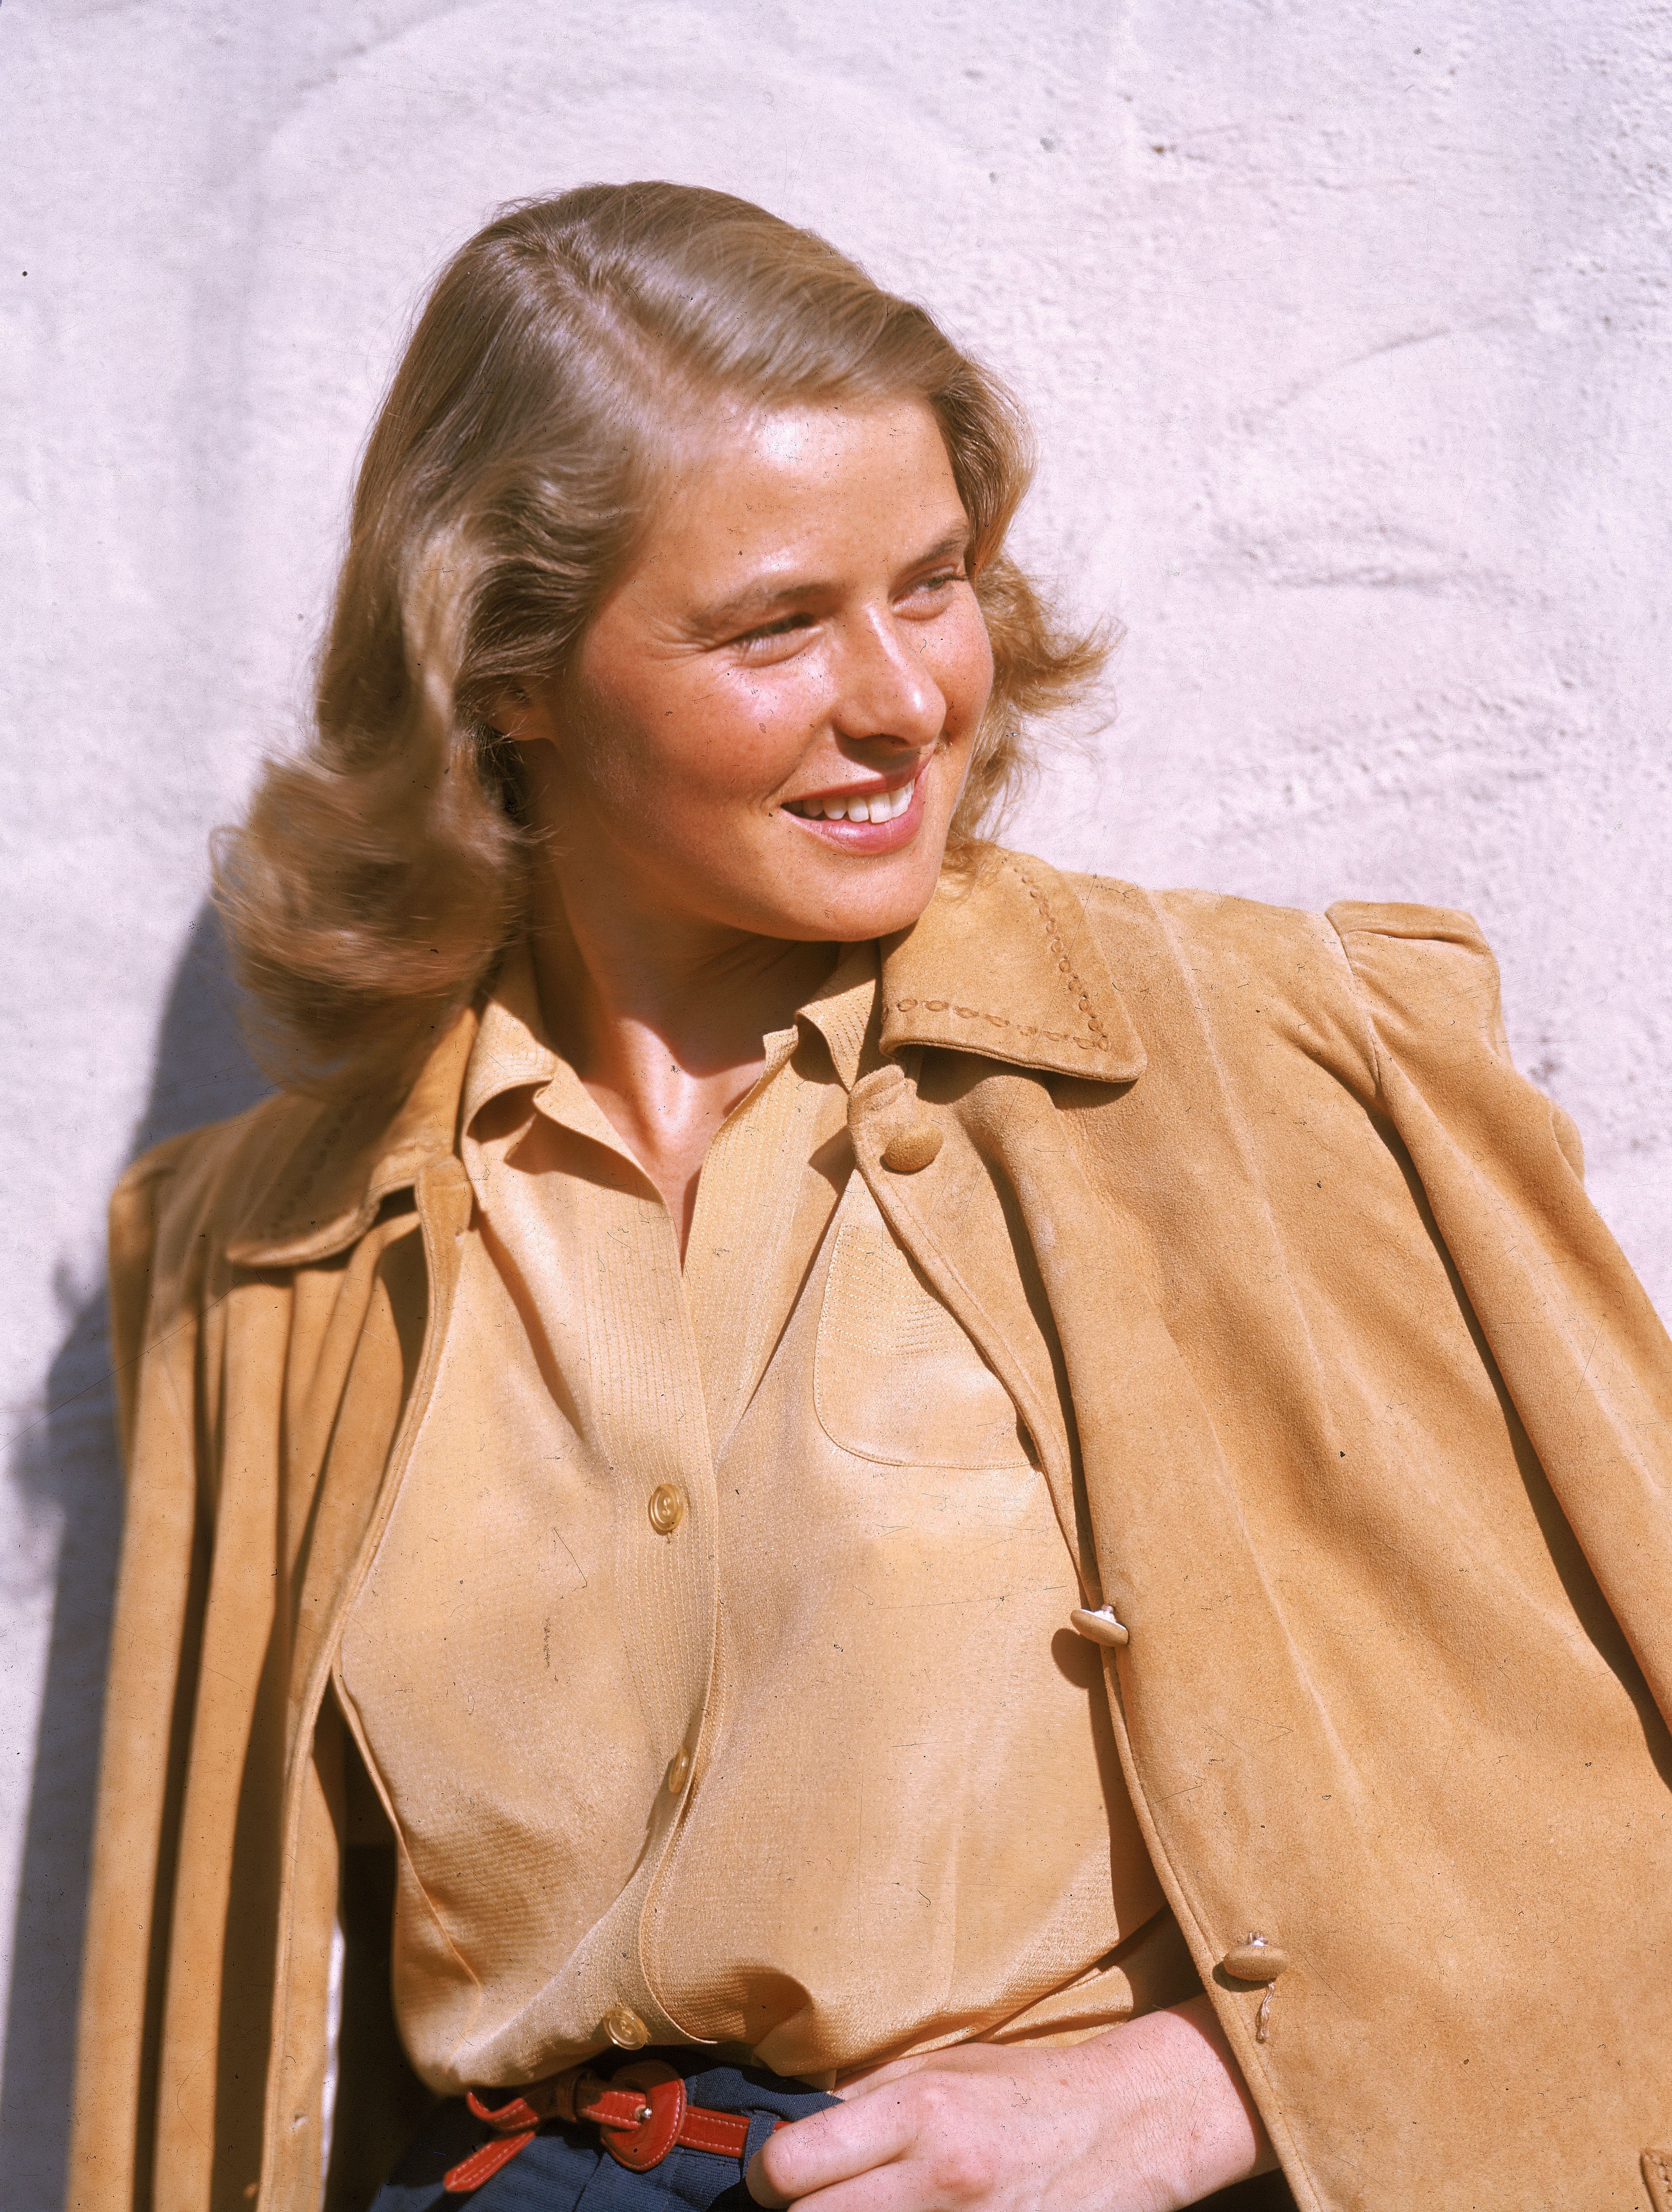 Ingrid Bergman poses outdoors in a tan leather jacket, circa 1945. | Source: Getty Images